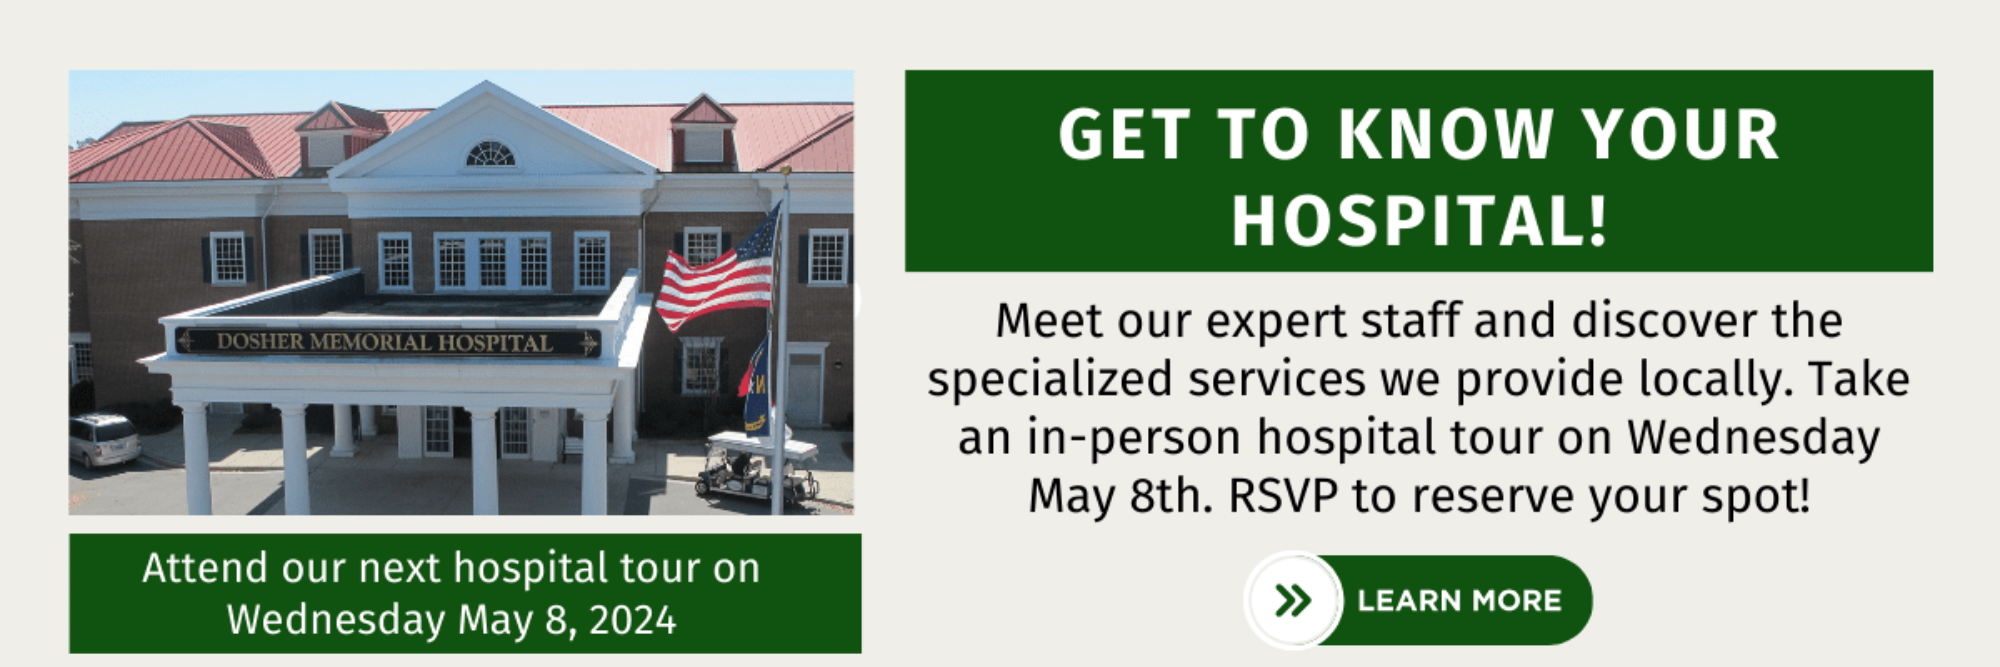 GET TO KNOW YOUR HOSPITAL!
Meet our expert staff and discover the specialized services we provide locally. Take an in-person hospital tour on Wednesday February 7th. RSVP to reserve your spot!

Attend our next Hospital Tour on Wednesday May 8, 2024.